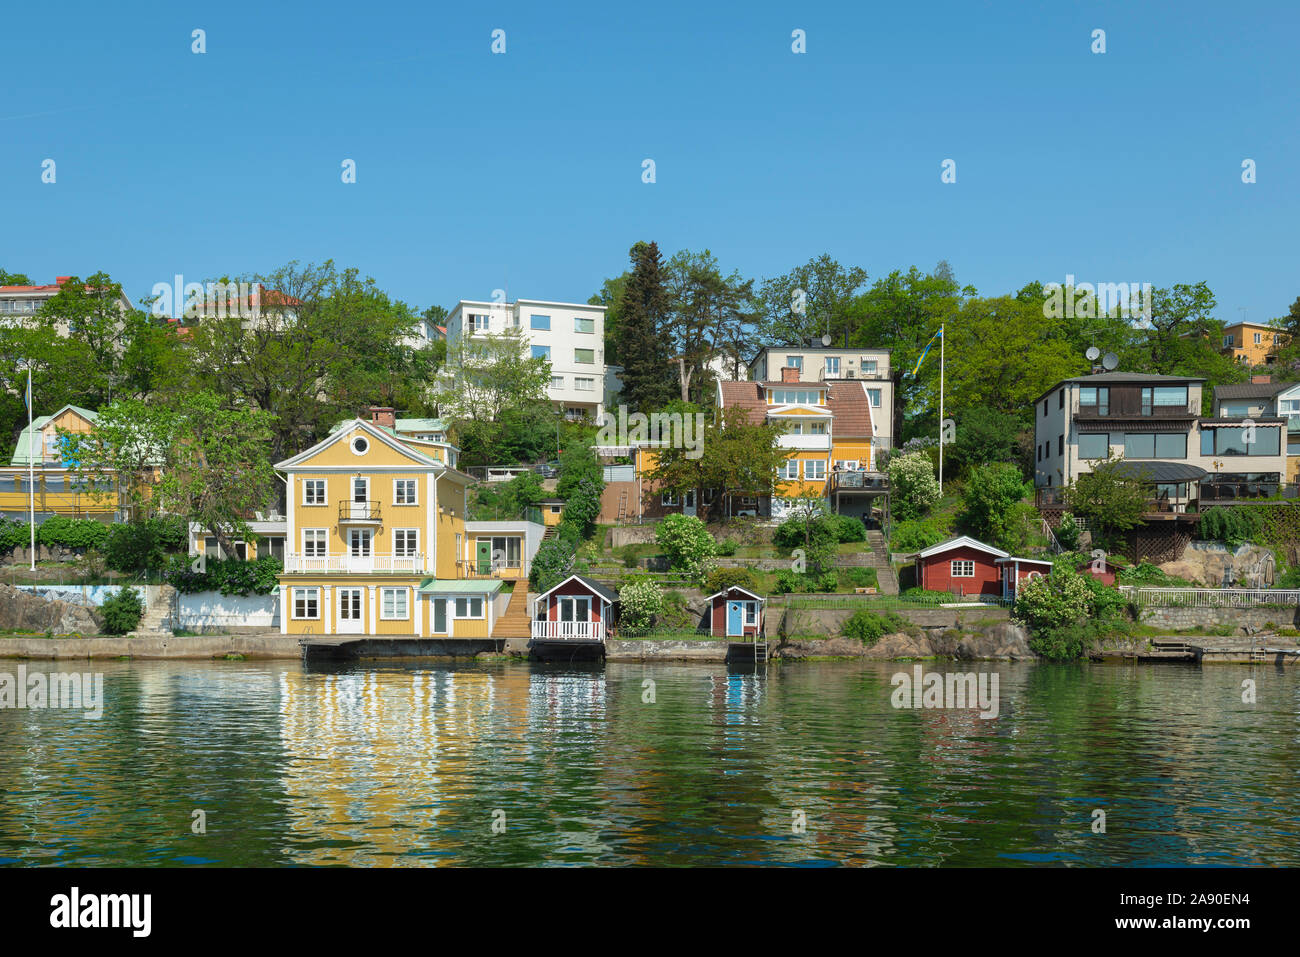 Stockholm waterfront, view of colorful waterside buildings on the island of Stora Essingen along Lake Malaren in east Stockholm, Sweden. Stock Photo